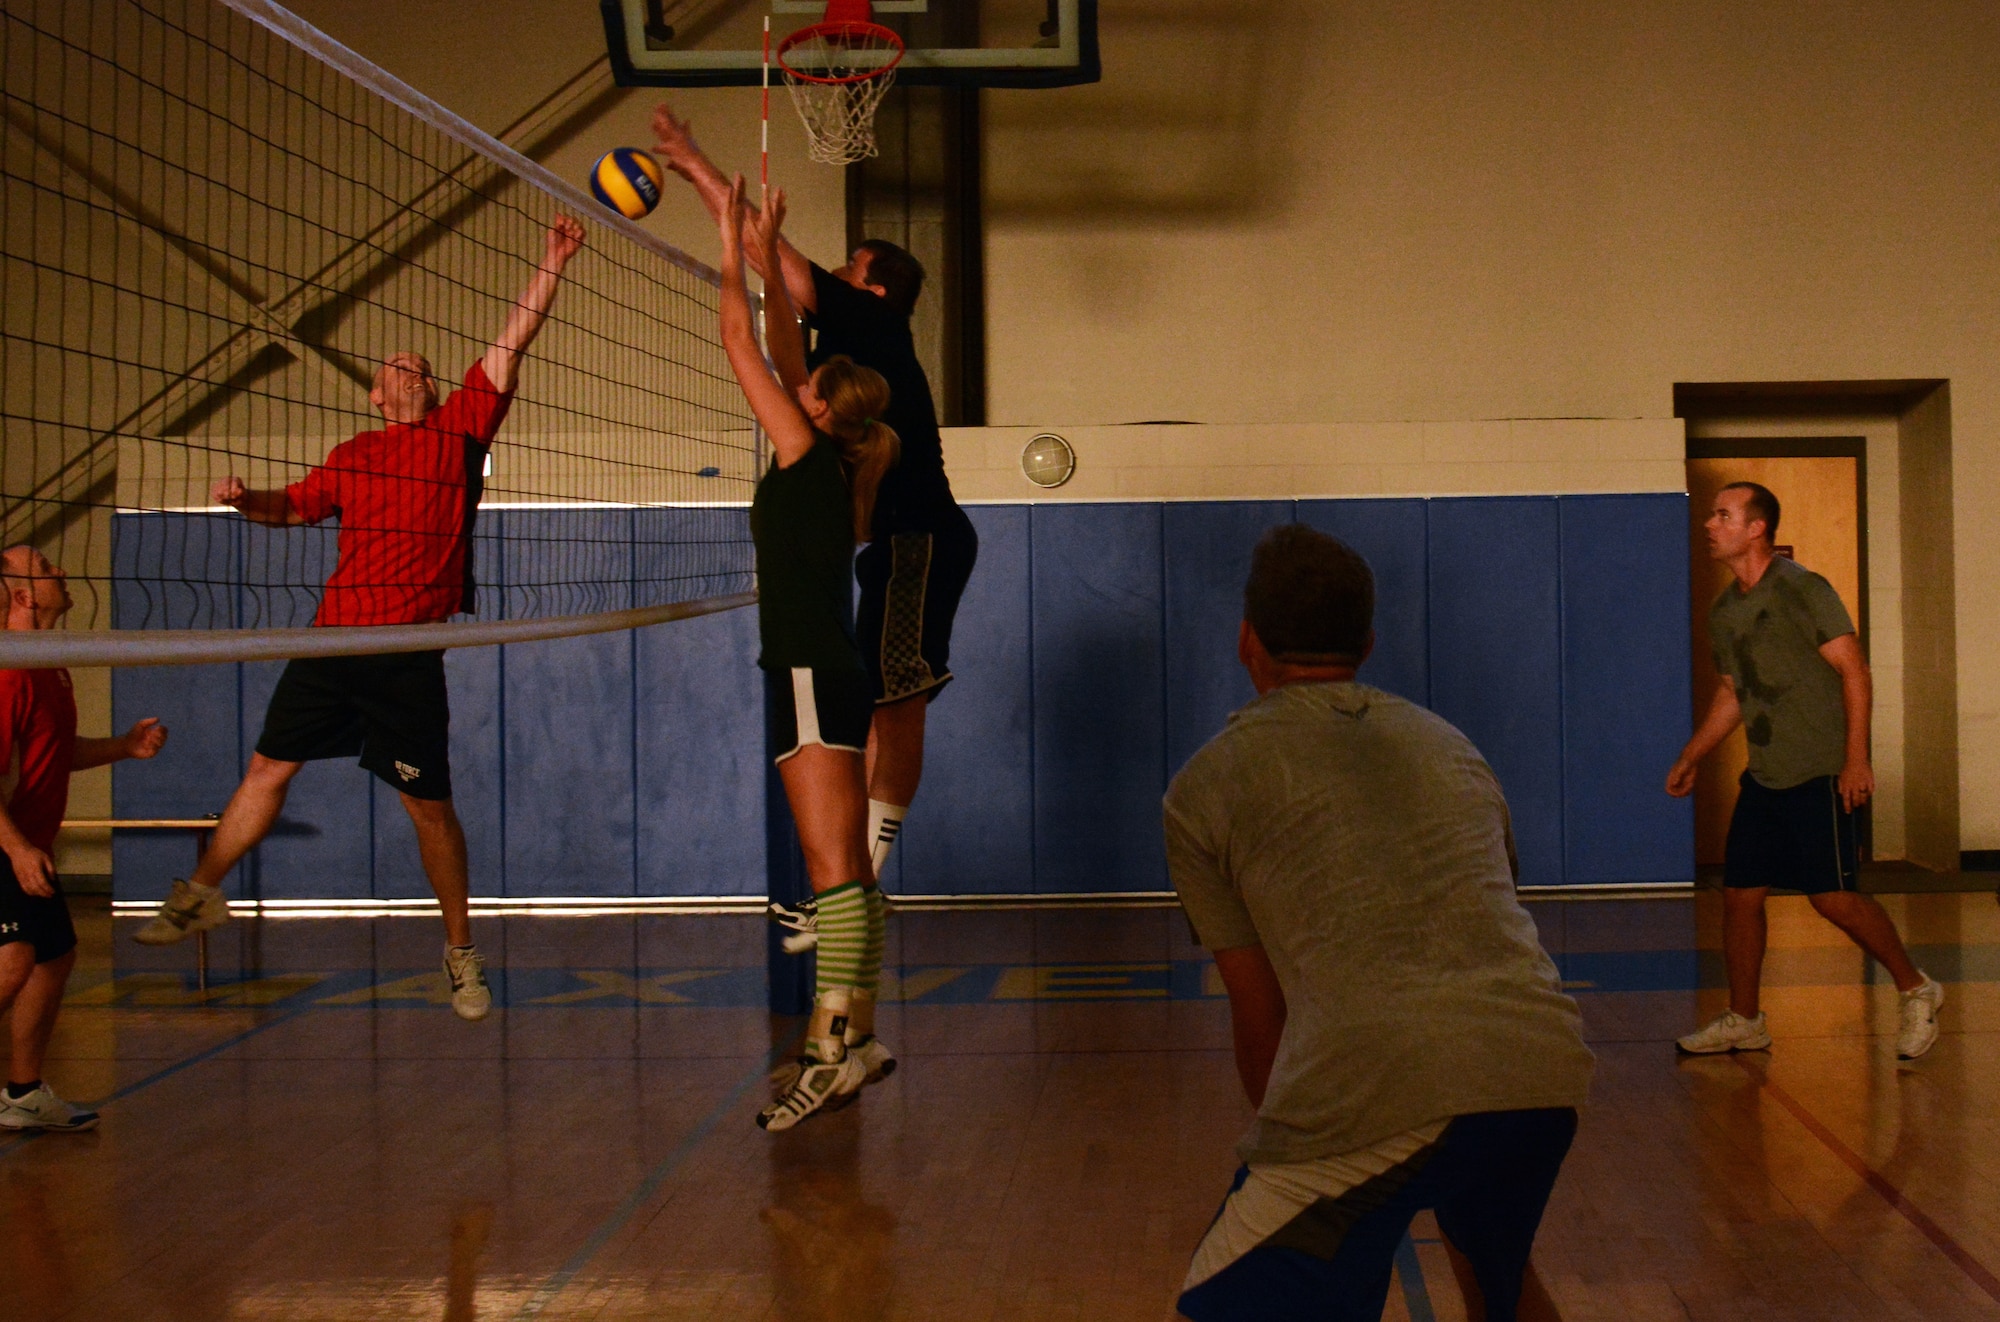 Master Sgt. Robert Vensel (in red), Squadron Officer College, Punches the ball, blocking a spike by members of the Air Command and Staff College team during the 2014 Maxwell-Gunter Air Force Base intramural volleyball championship, May 6, 2014. The intramural league is designed to help build cohesion and improve morale within units and among service members on base. (U.S. Air Force Photo by Staff Sgt. Gregory Brook)